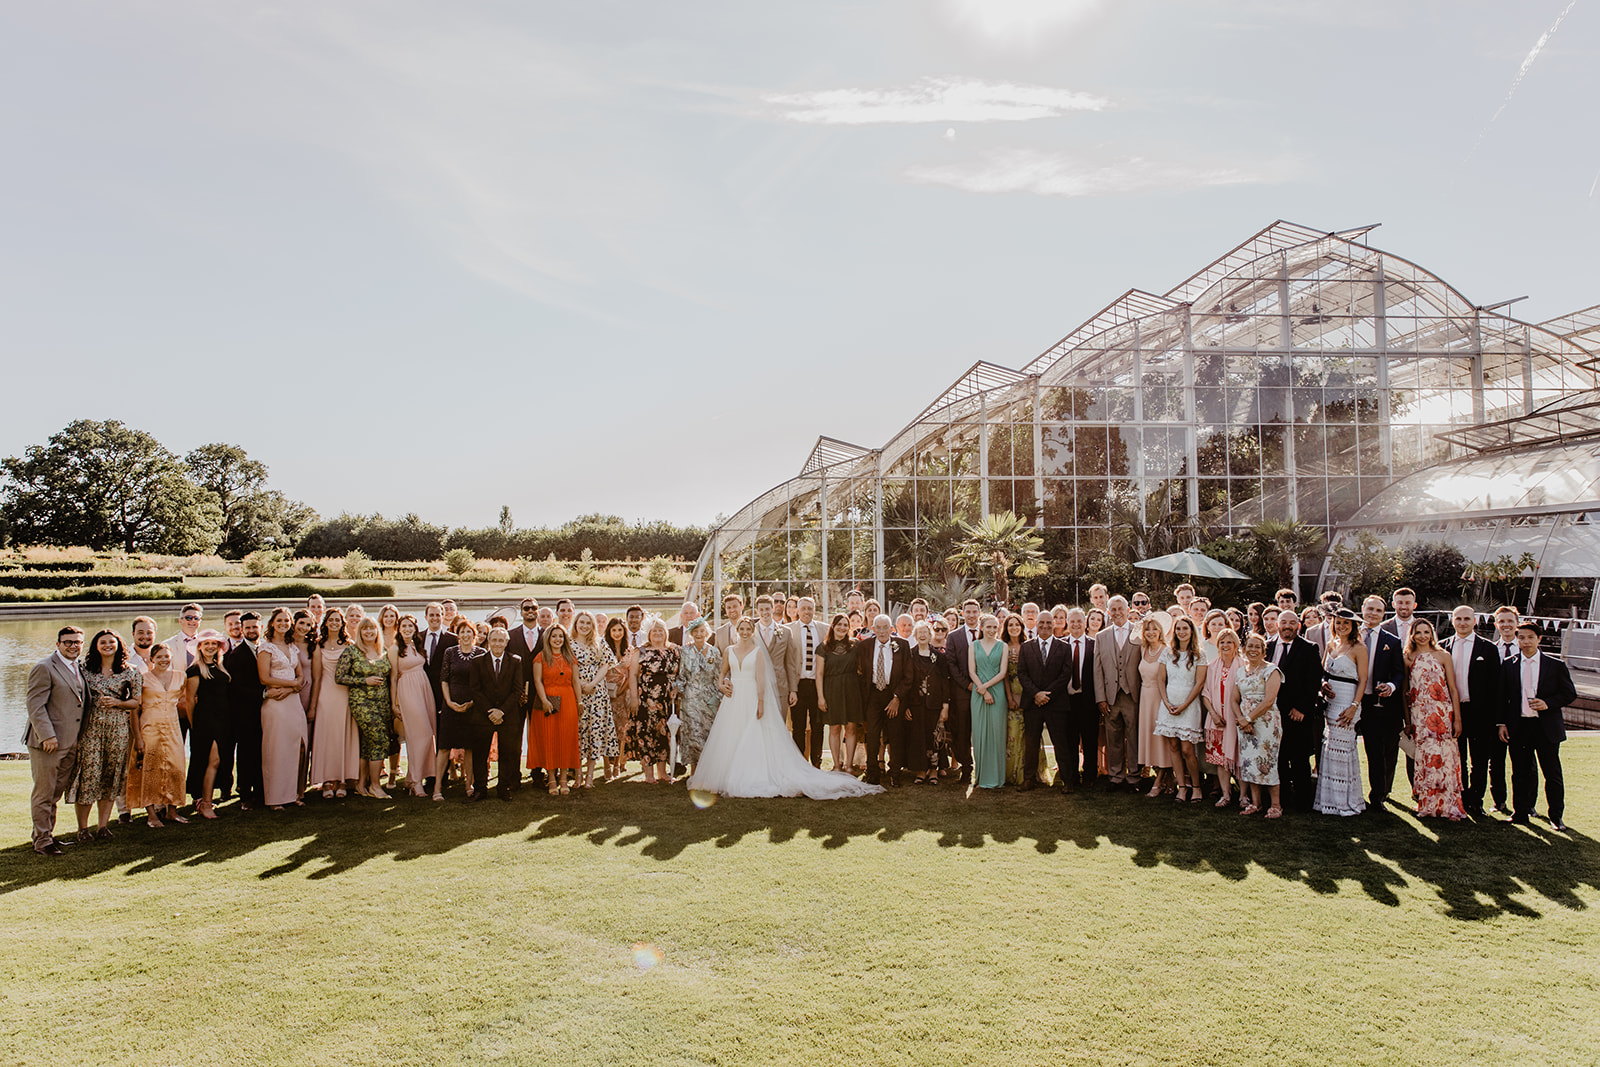 Guests group shot at a RHS Gardens Wisley Wedding. By Olive Joy Photography